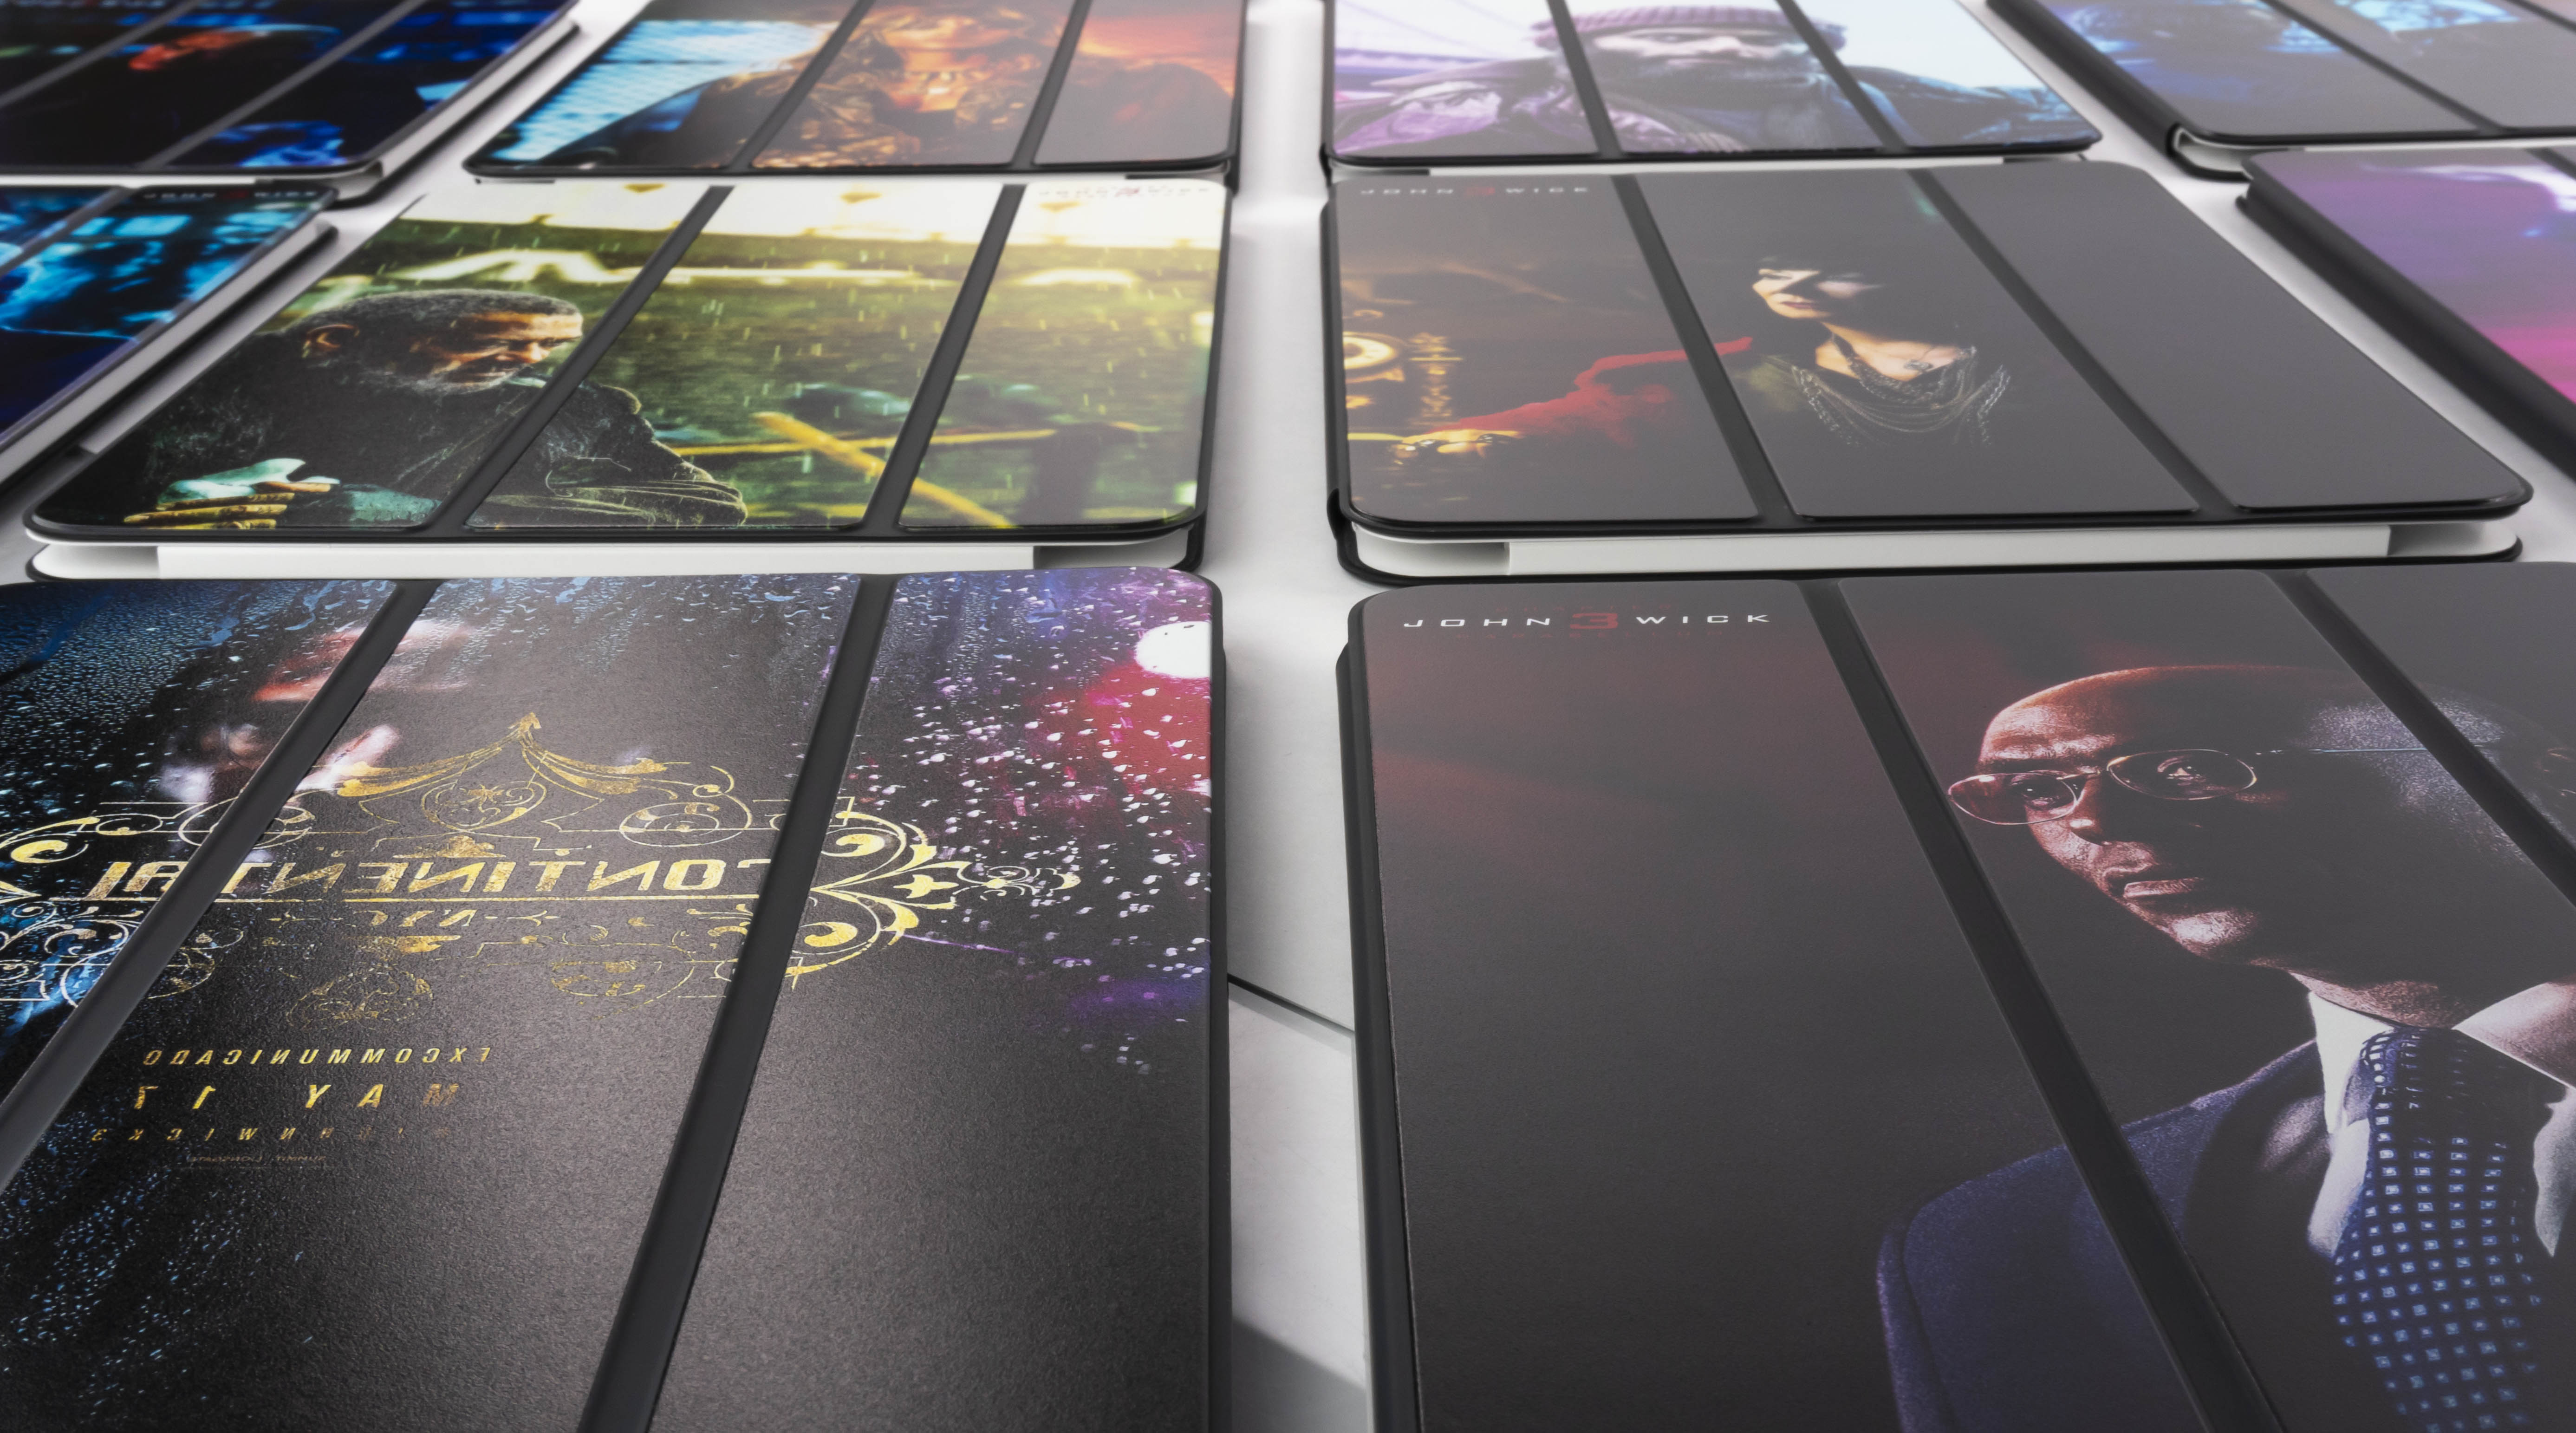 Every iPad Smart Cover is personalized for each member of the film cast and crew.